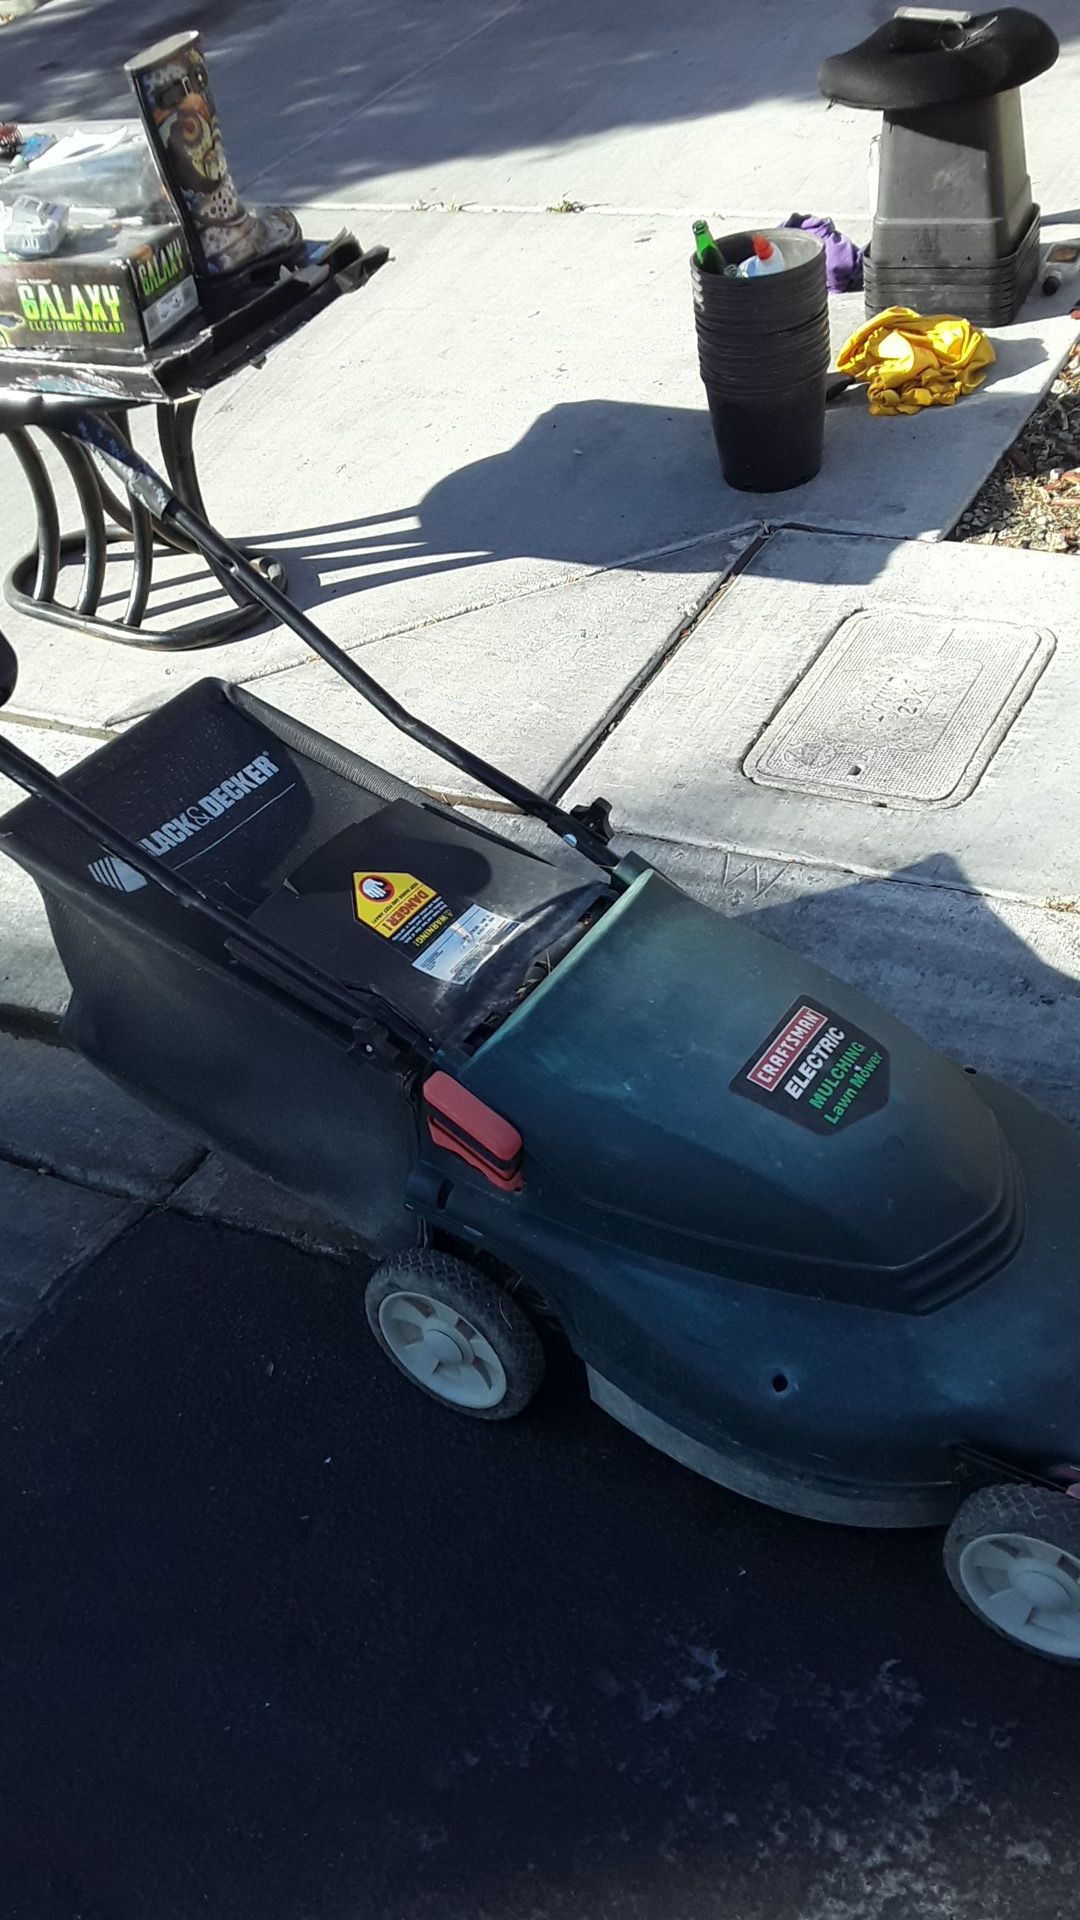 Craftsman electric lawn mower and mulching